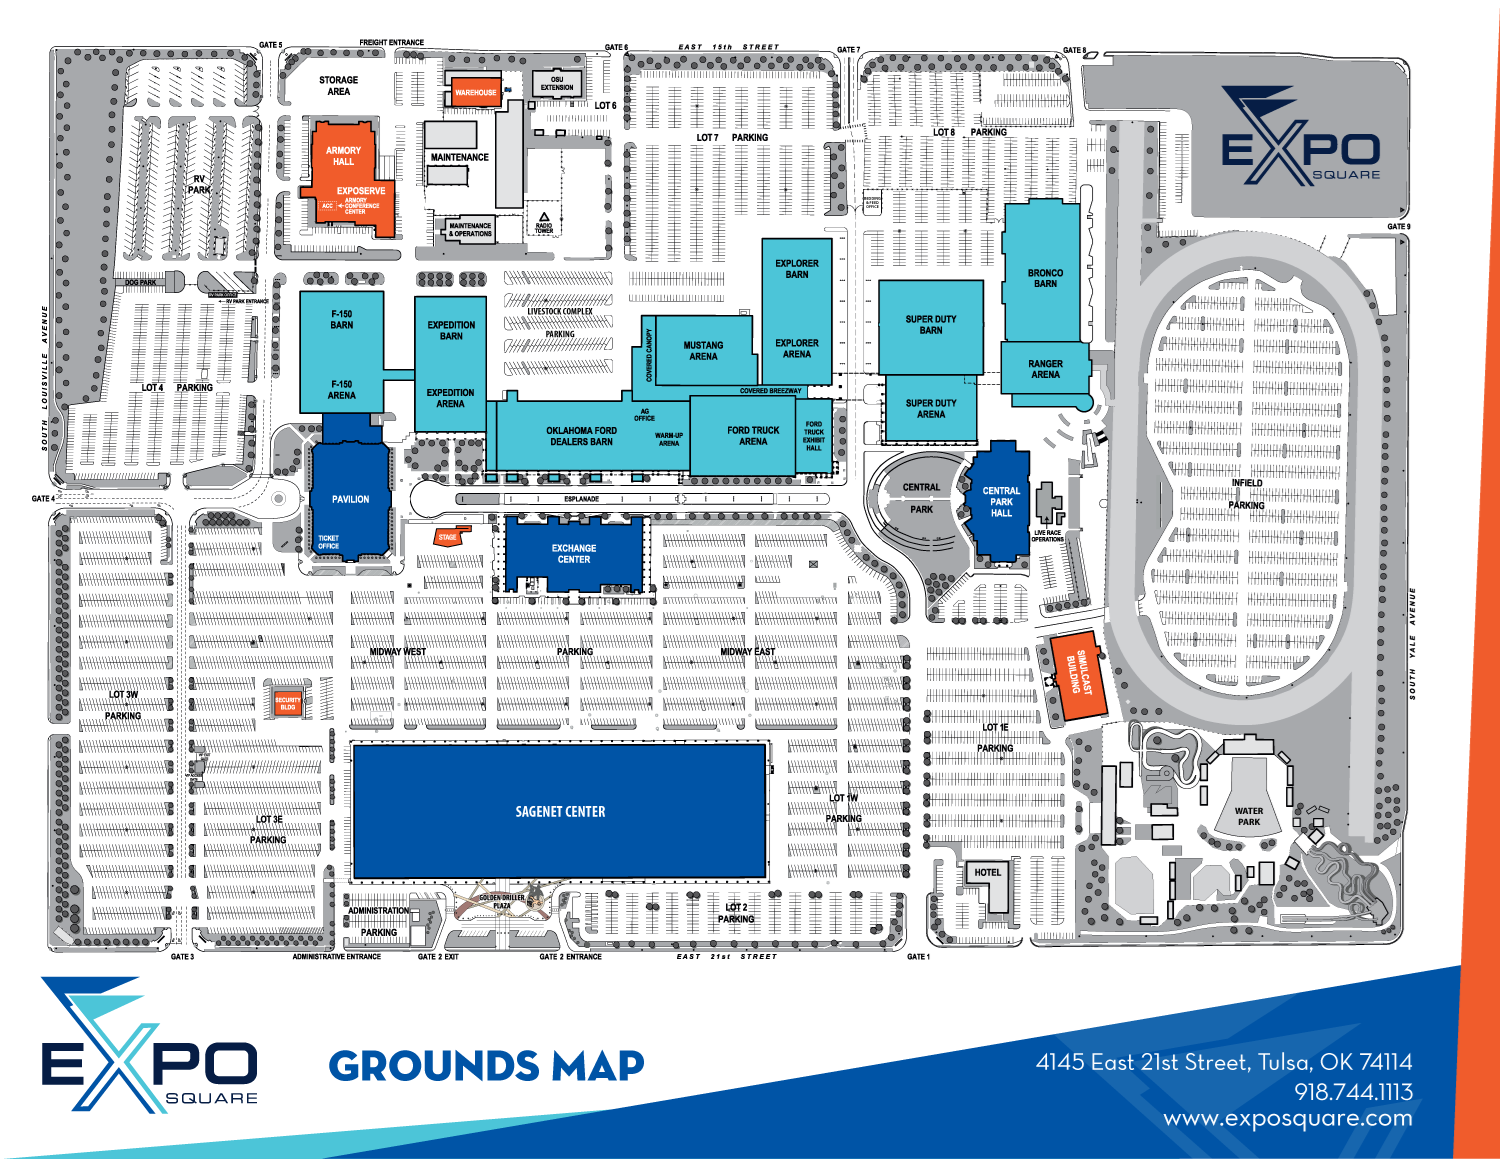 Expo Square Grounds Map